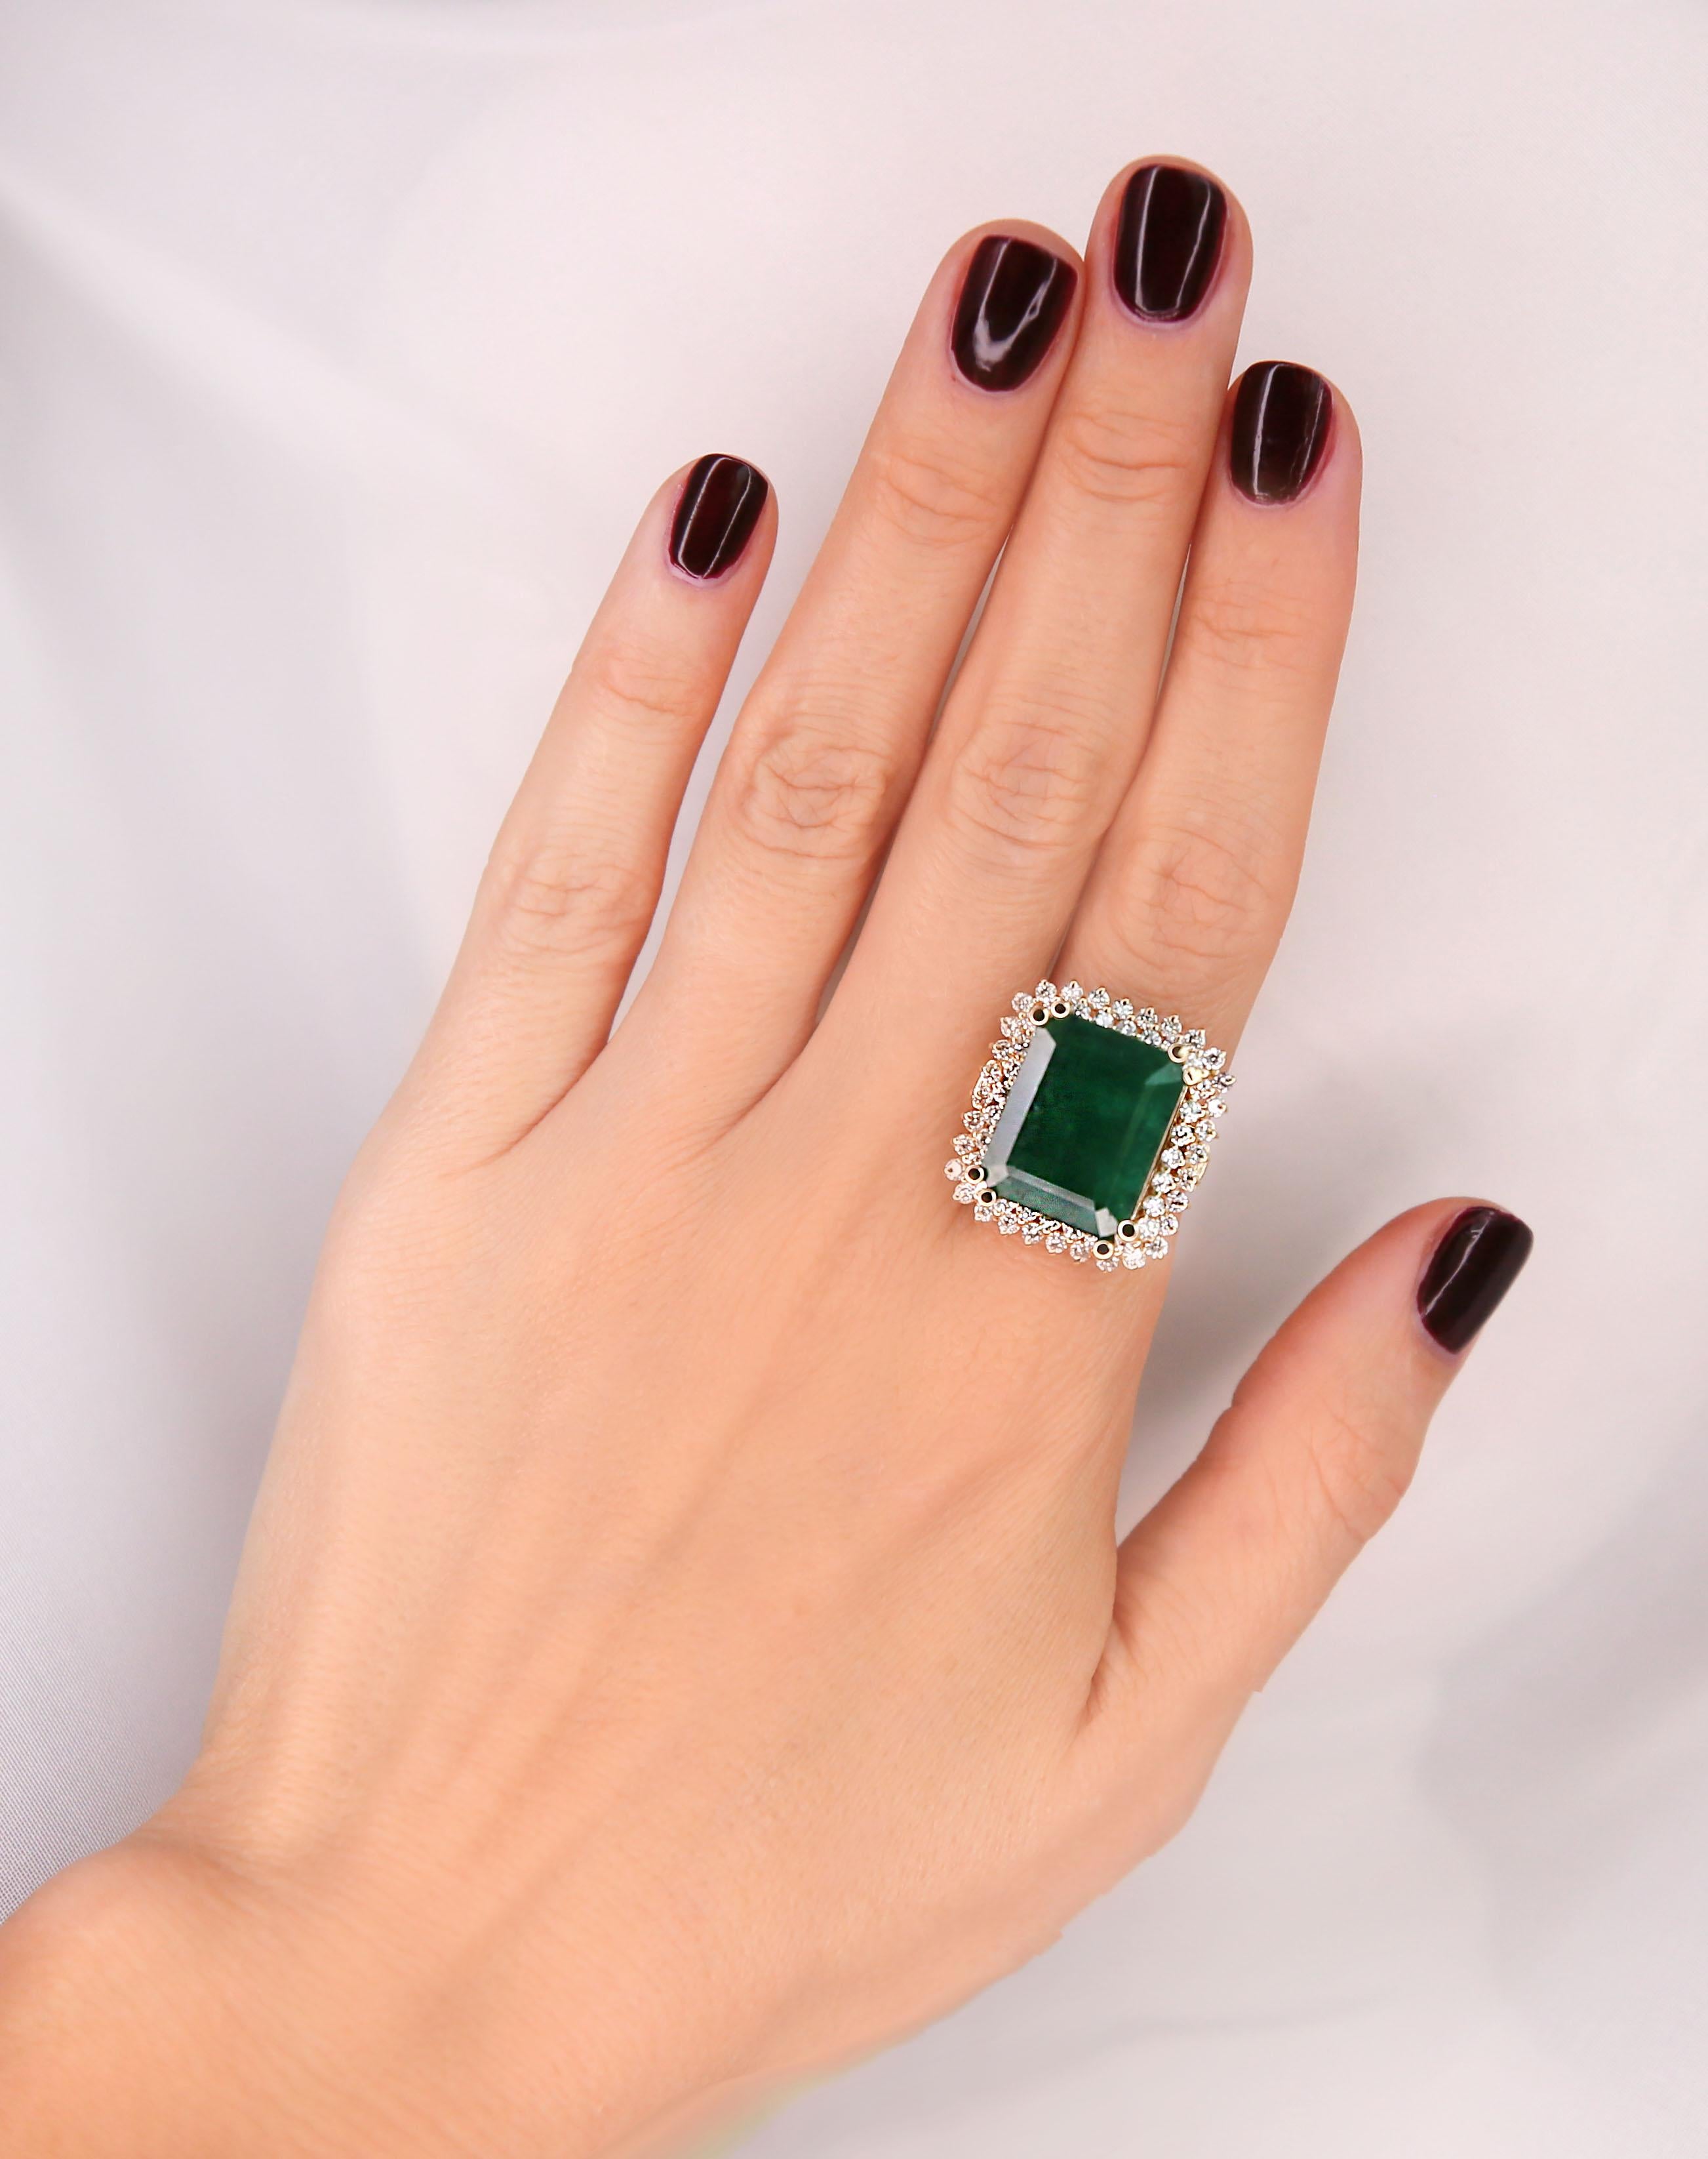 16.13 CTW Natural Emerald 14K Solid Yellow Gold Diamond Ring


Mainstone: Emerald

Stone Color: Green

Stone Weight: 14.13 Carat

Stone Shape: Emerald
Stone Quantity: 1

Stone Dimensions: 16.90x14.57 mm

Stone Creation Method: Natural

Stone